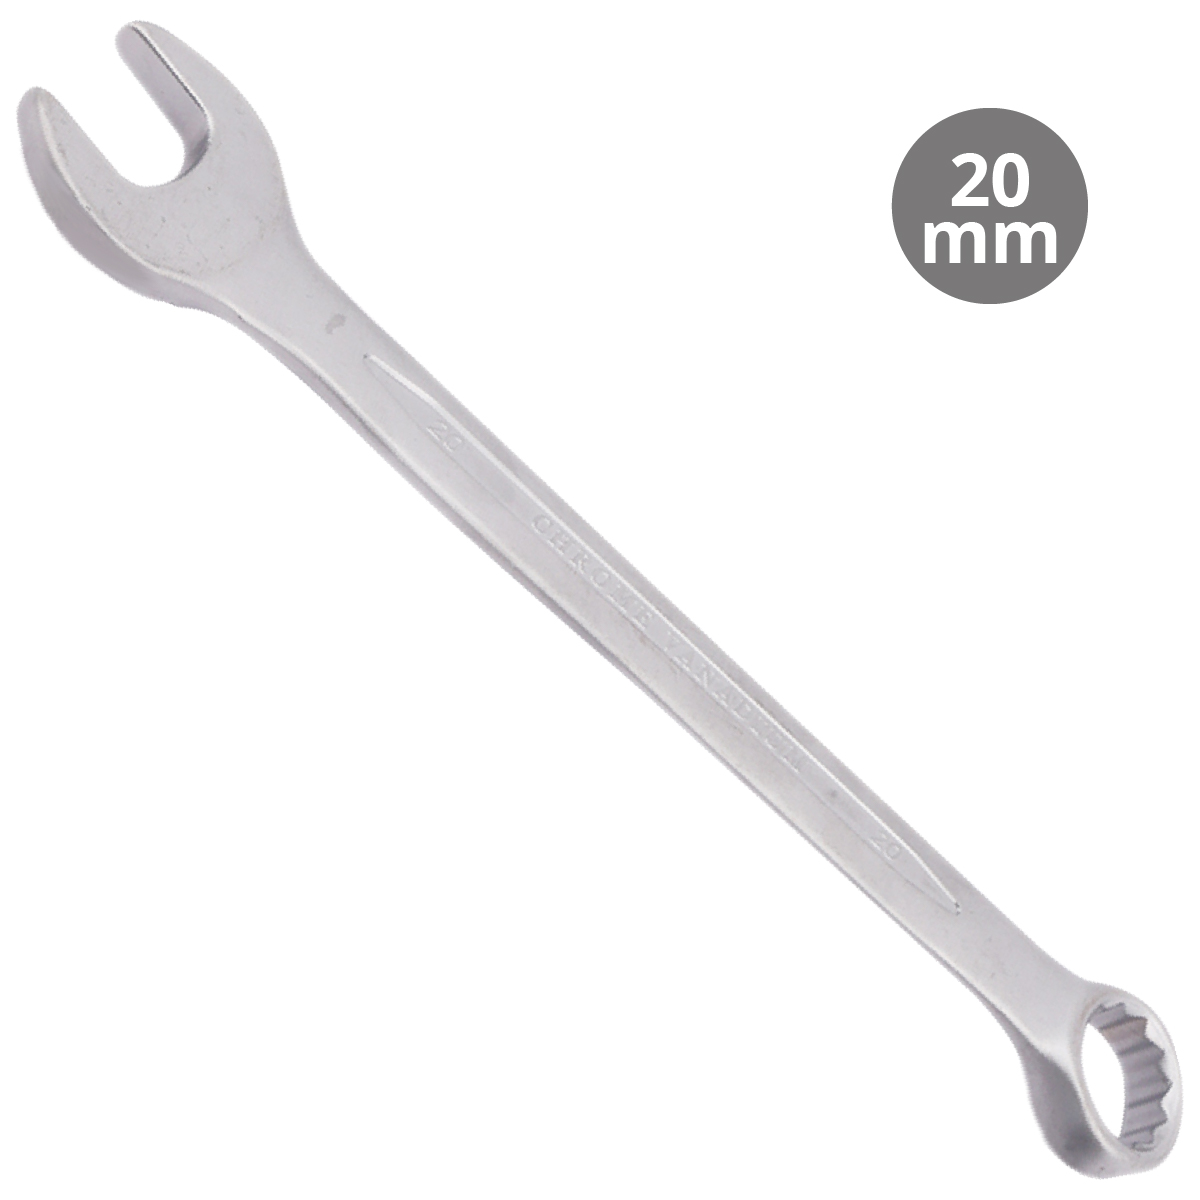 Combination wrench CR-V 20mm